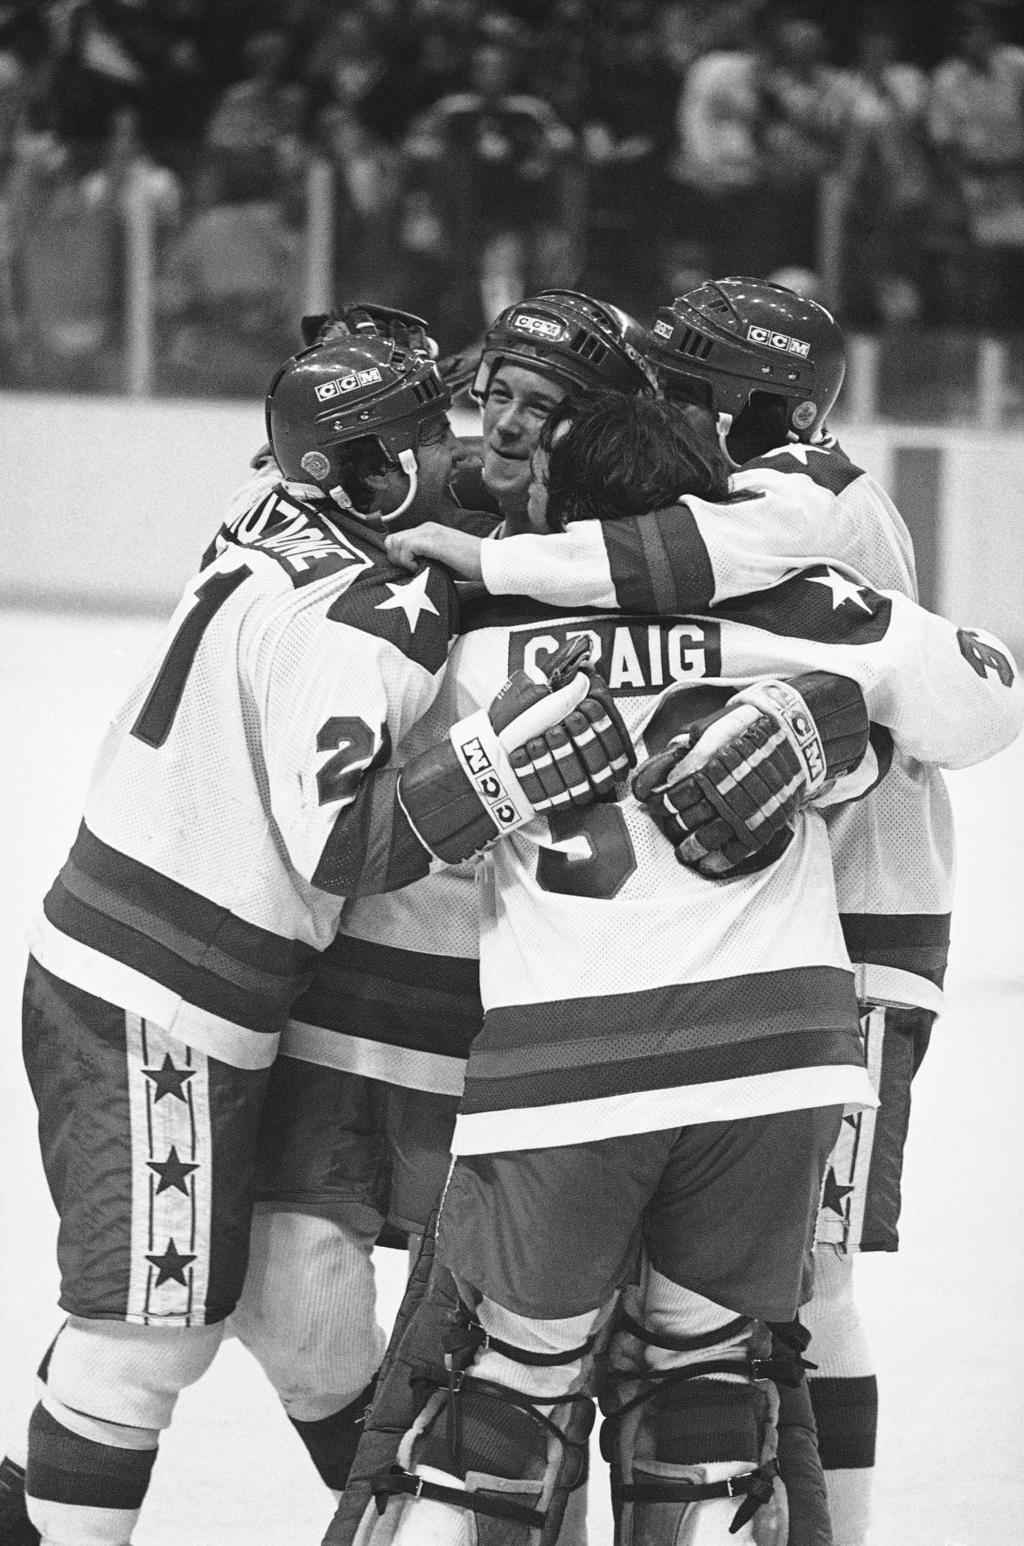 40 years ago the U.S. Olympic hockey team upset the Soviet Union and went  on to win the gold medal.